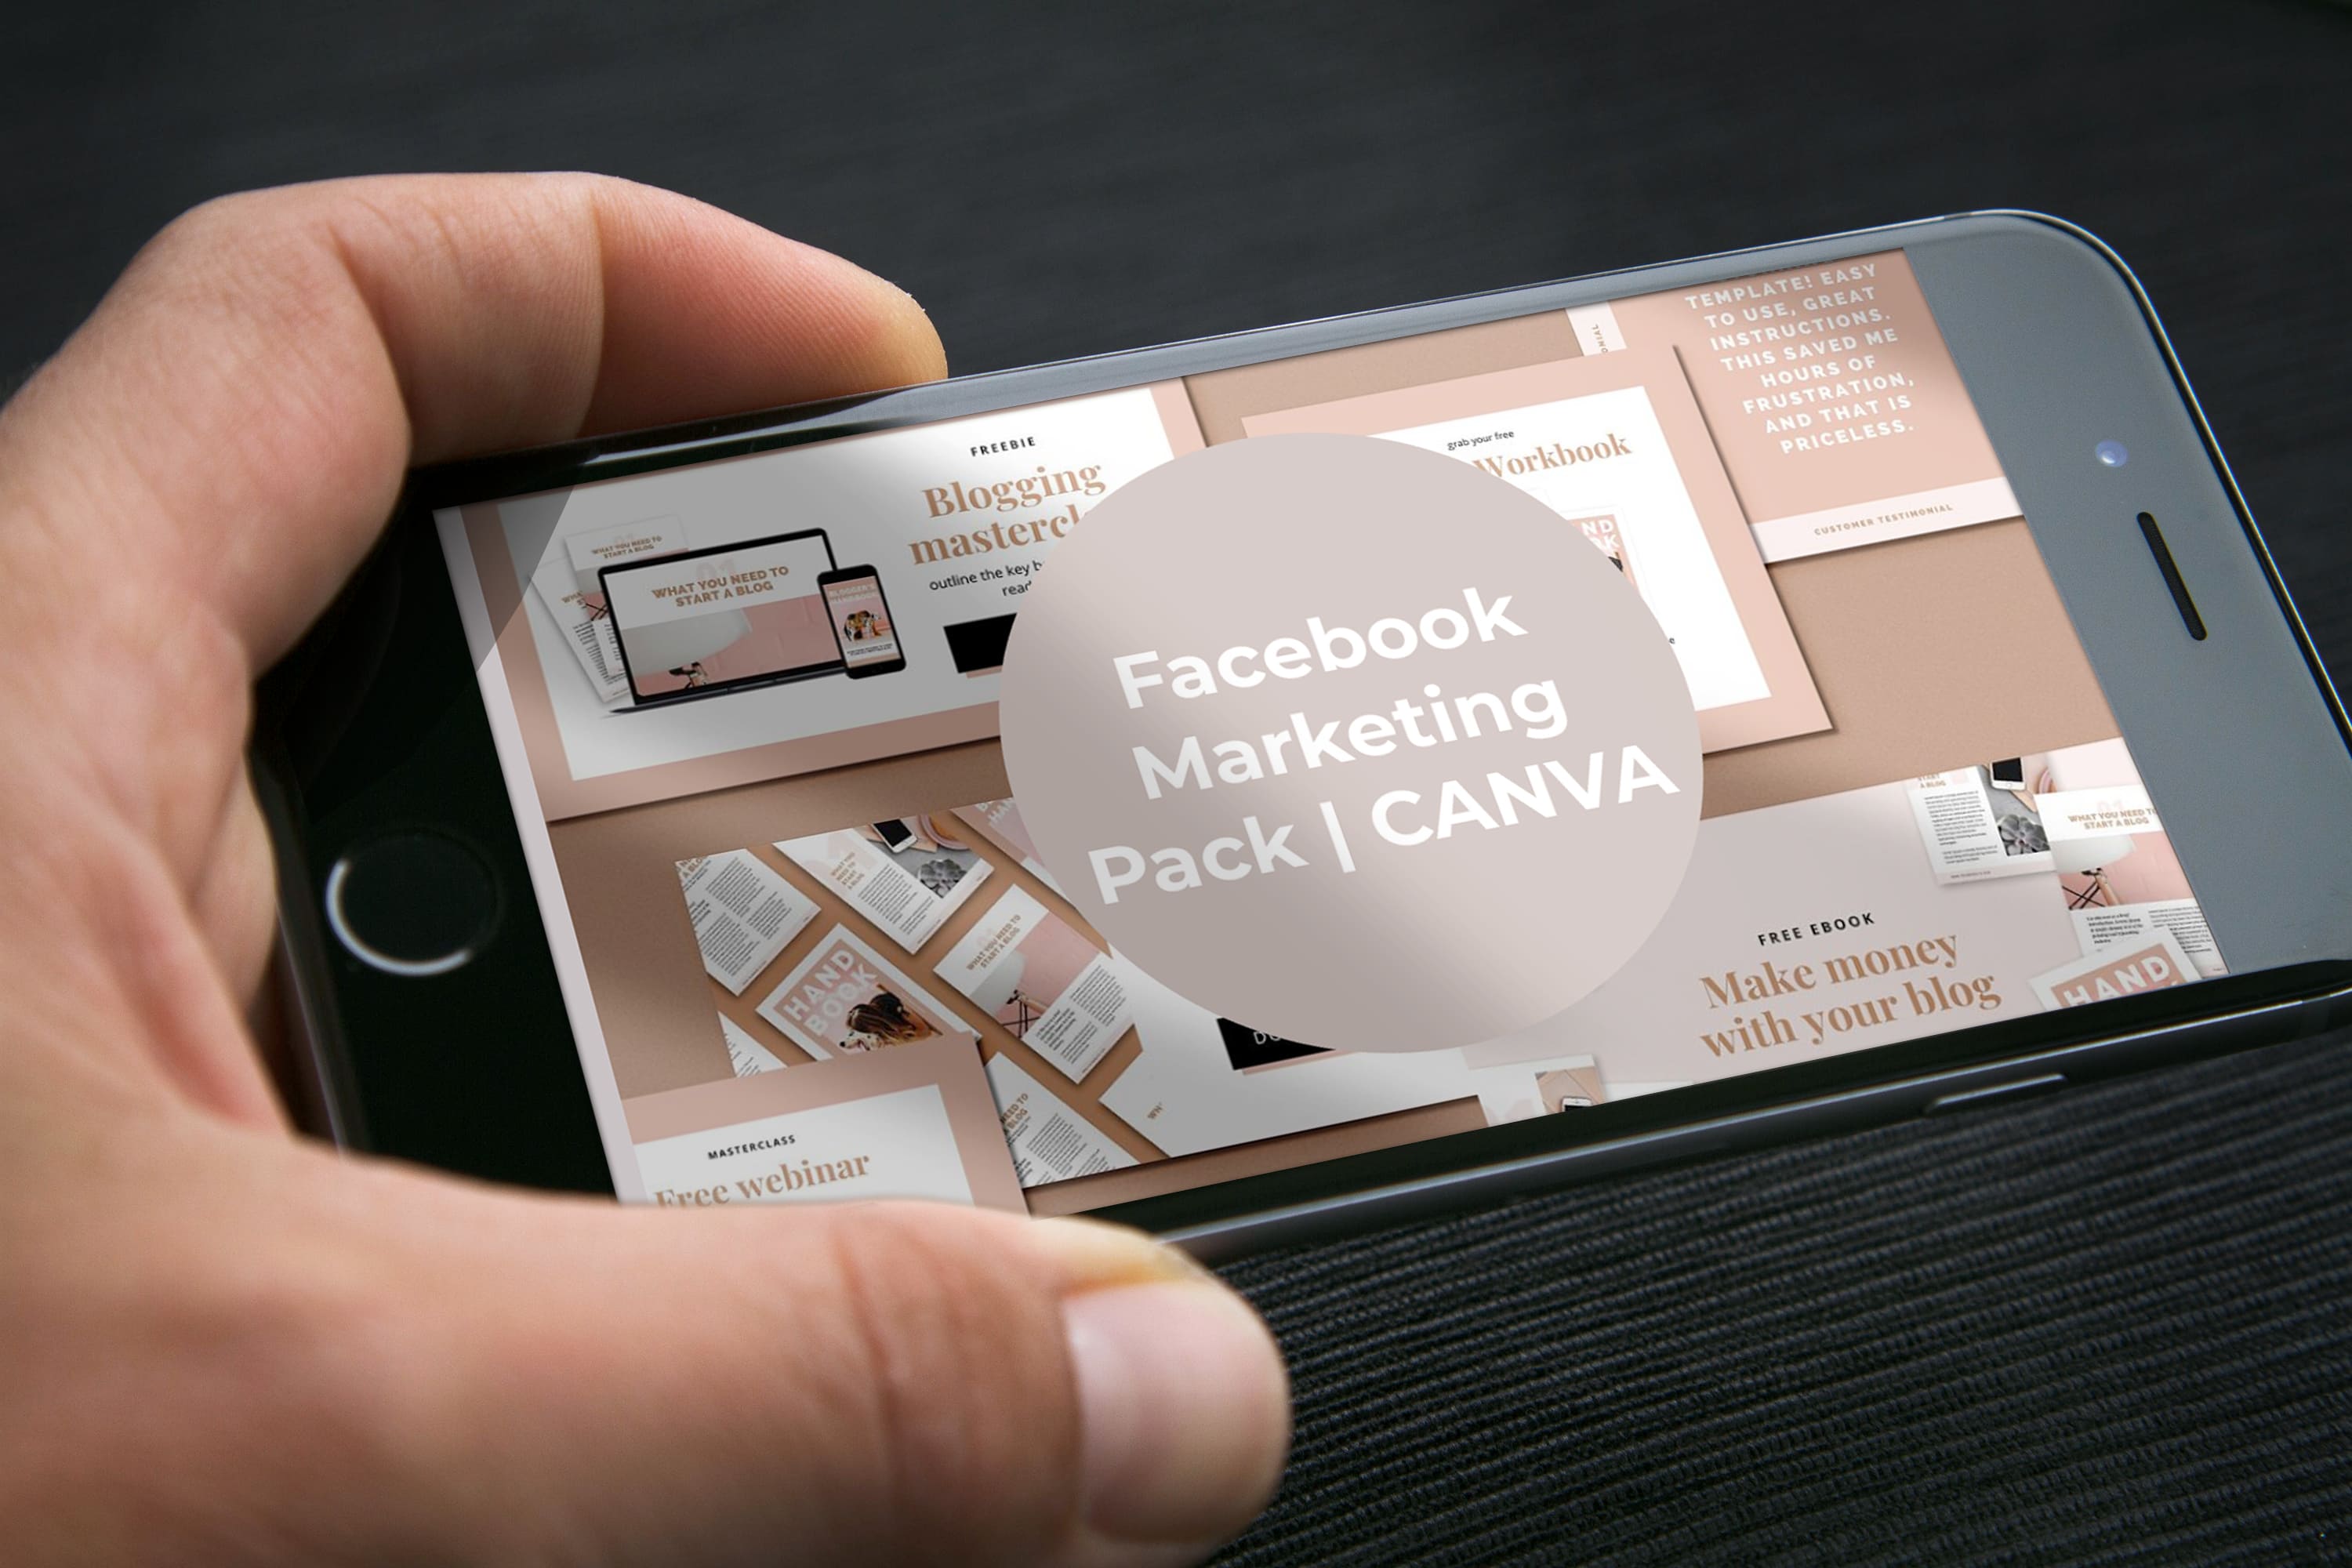 Mobile option of the Facebook Marketing Pack | CANVA.